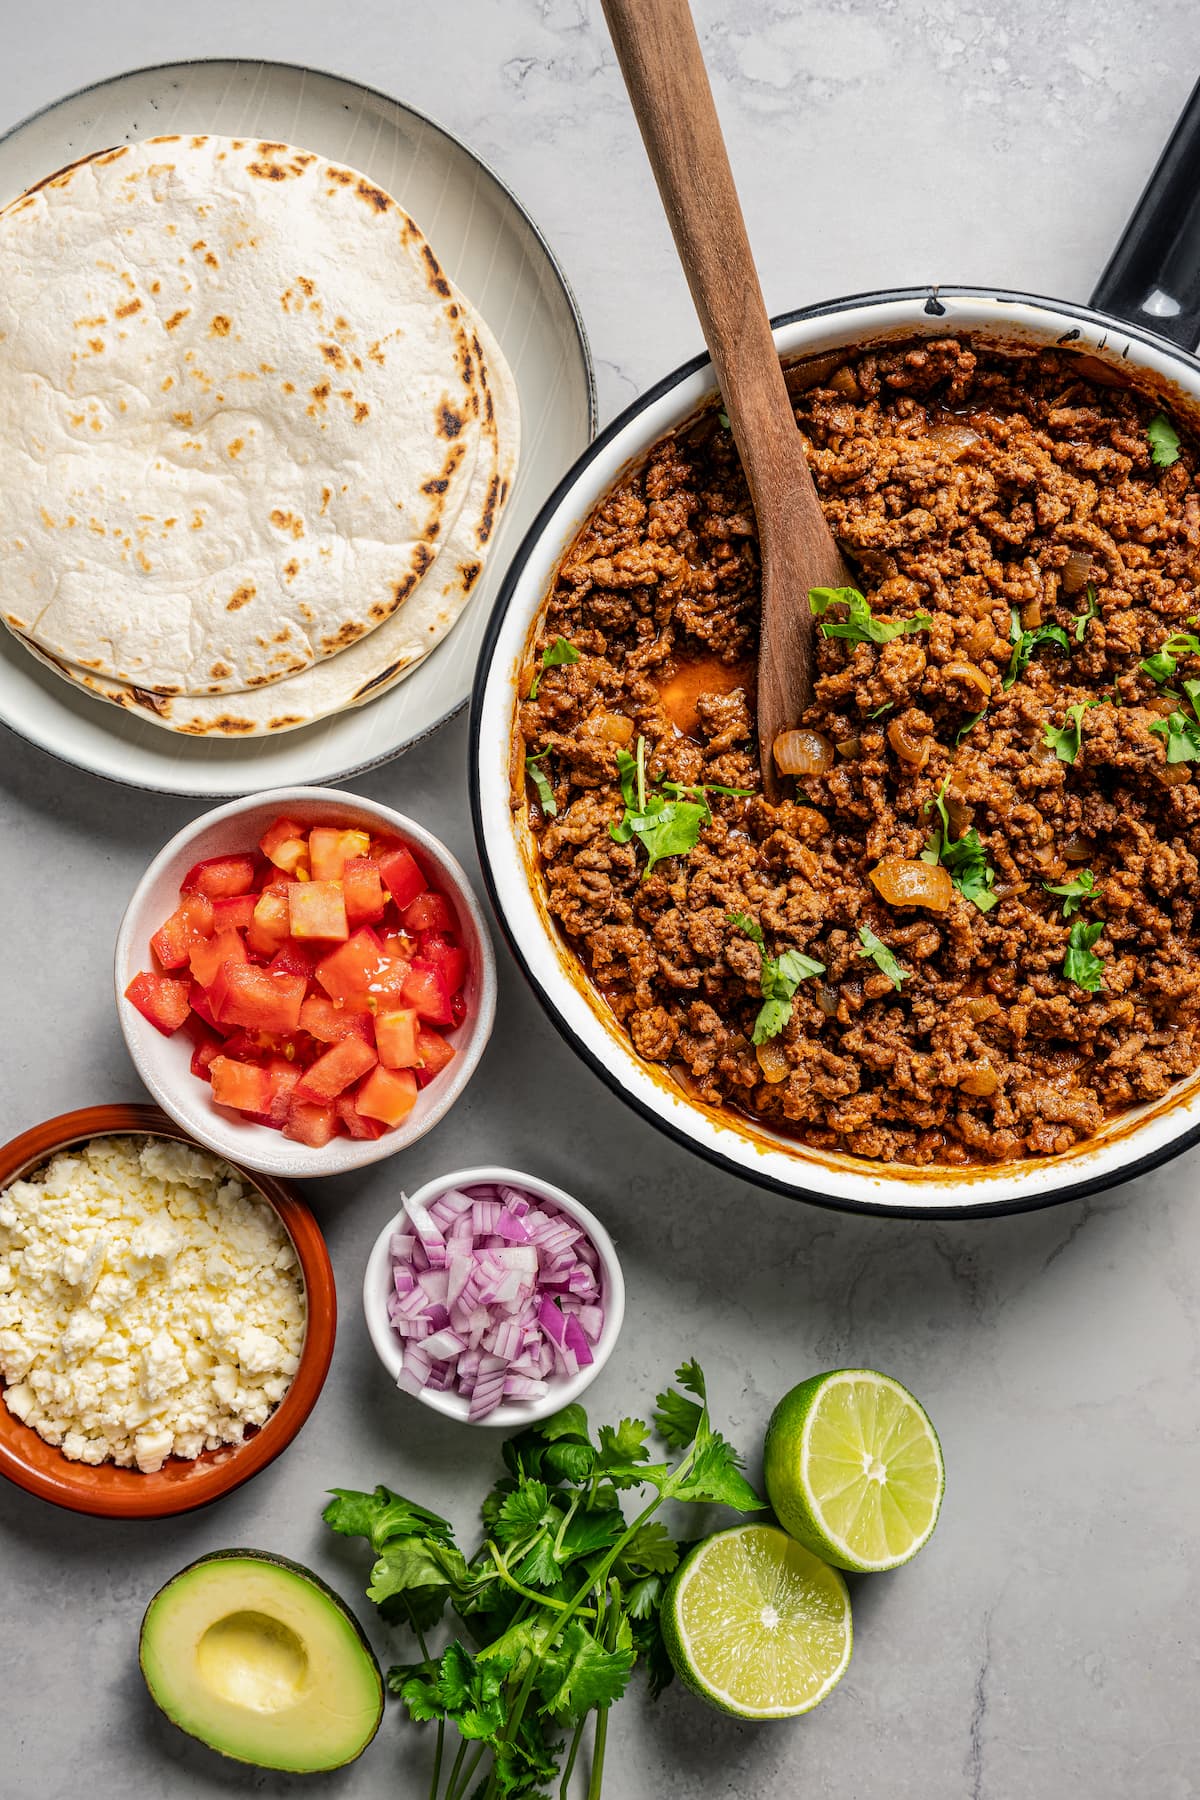 Taco meat along with other popular taco ingredients.